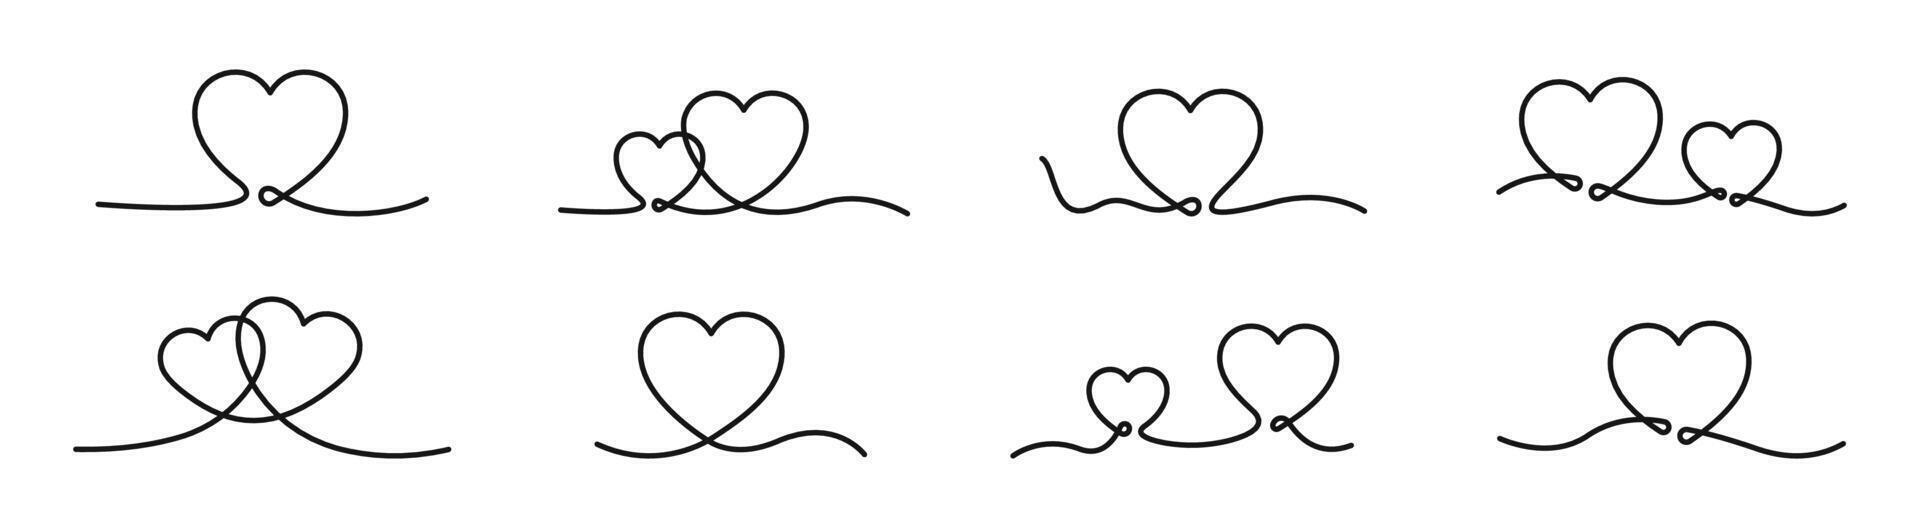 Continuous line art drawn hearts. Doodle hearts. Linear heart. Simple line hearts vector